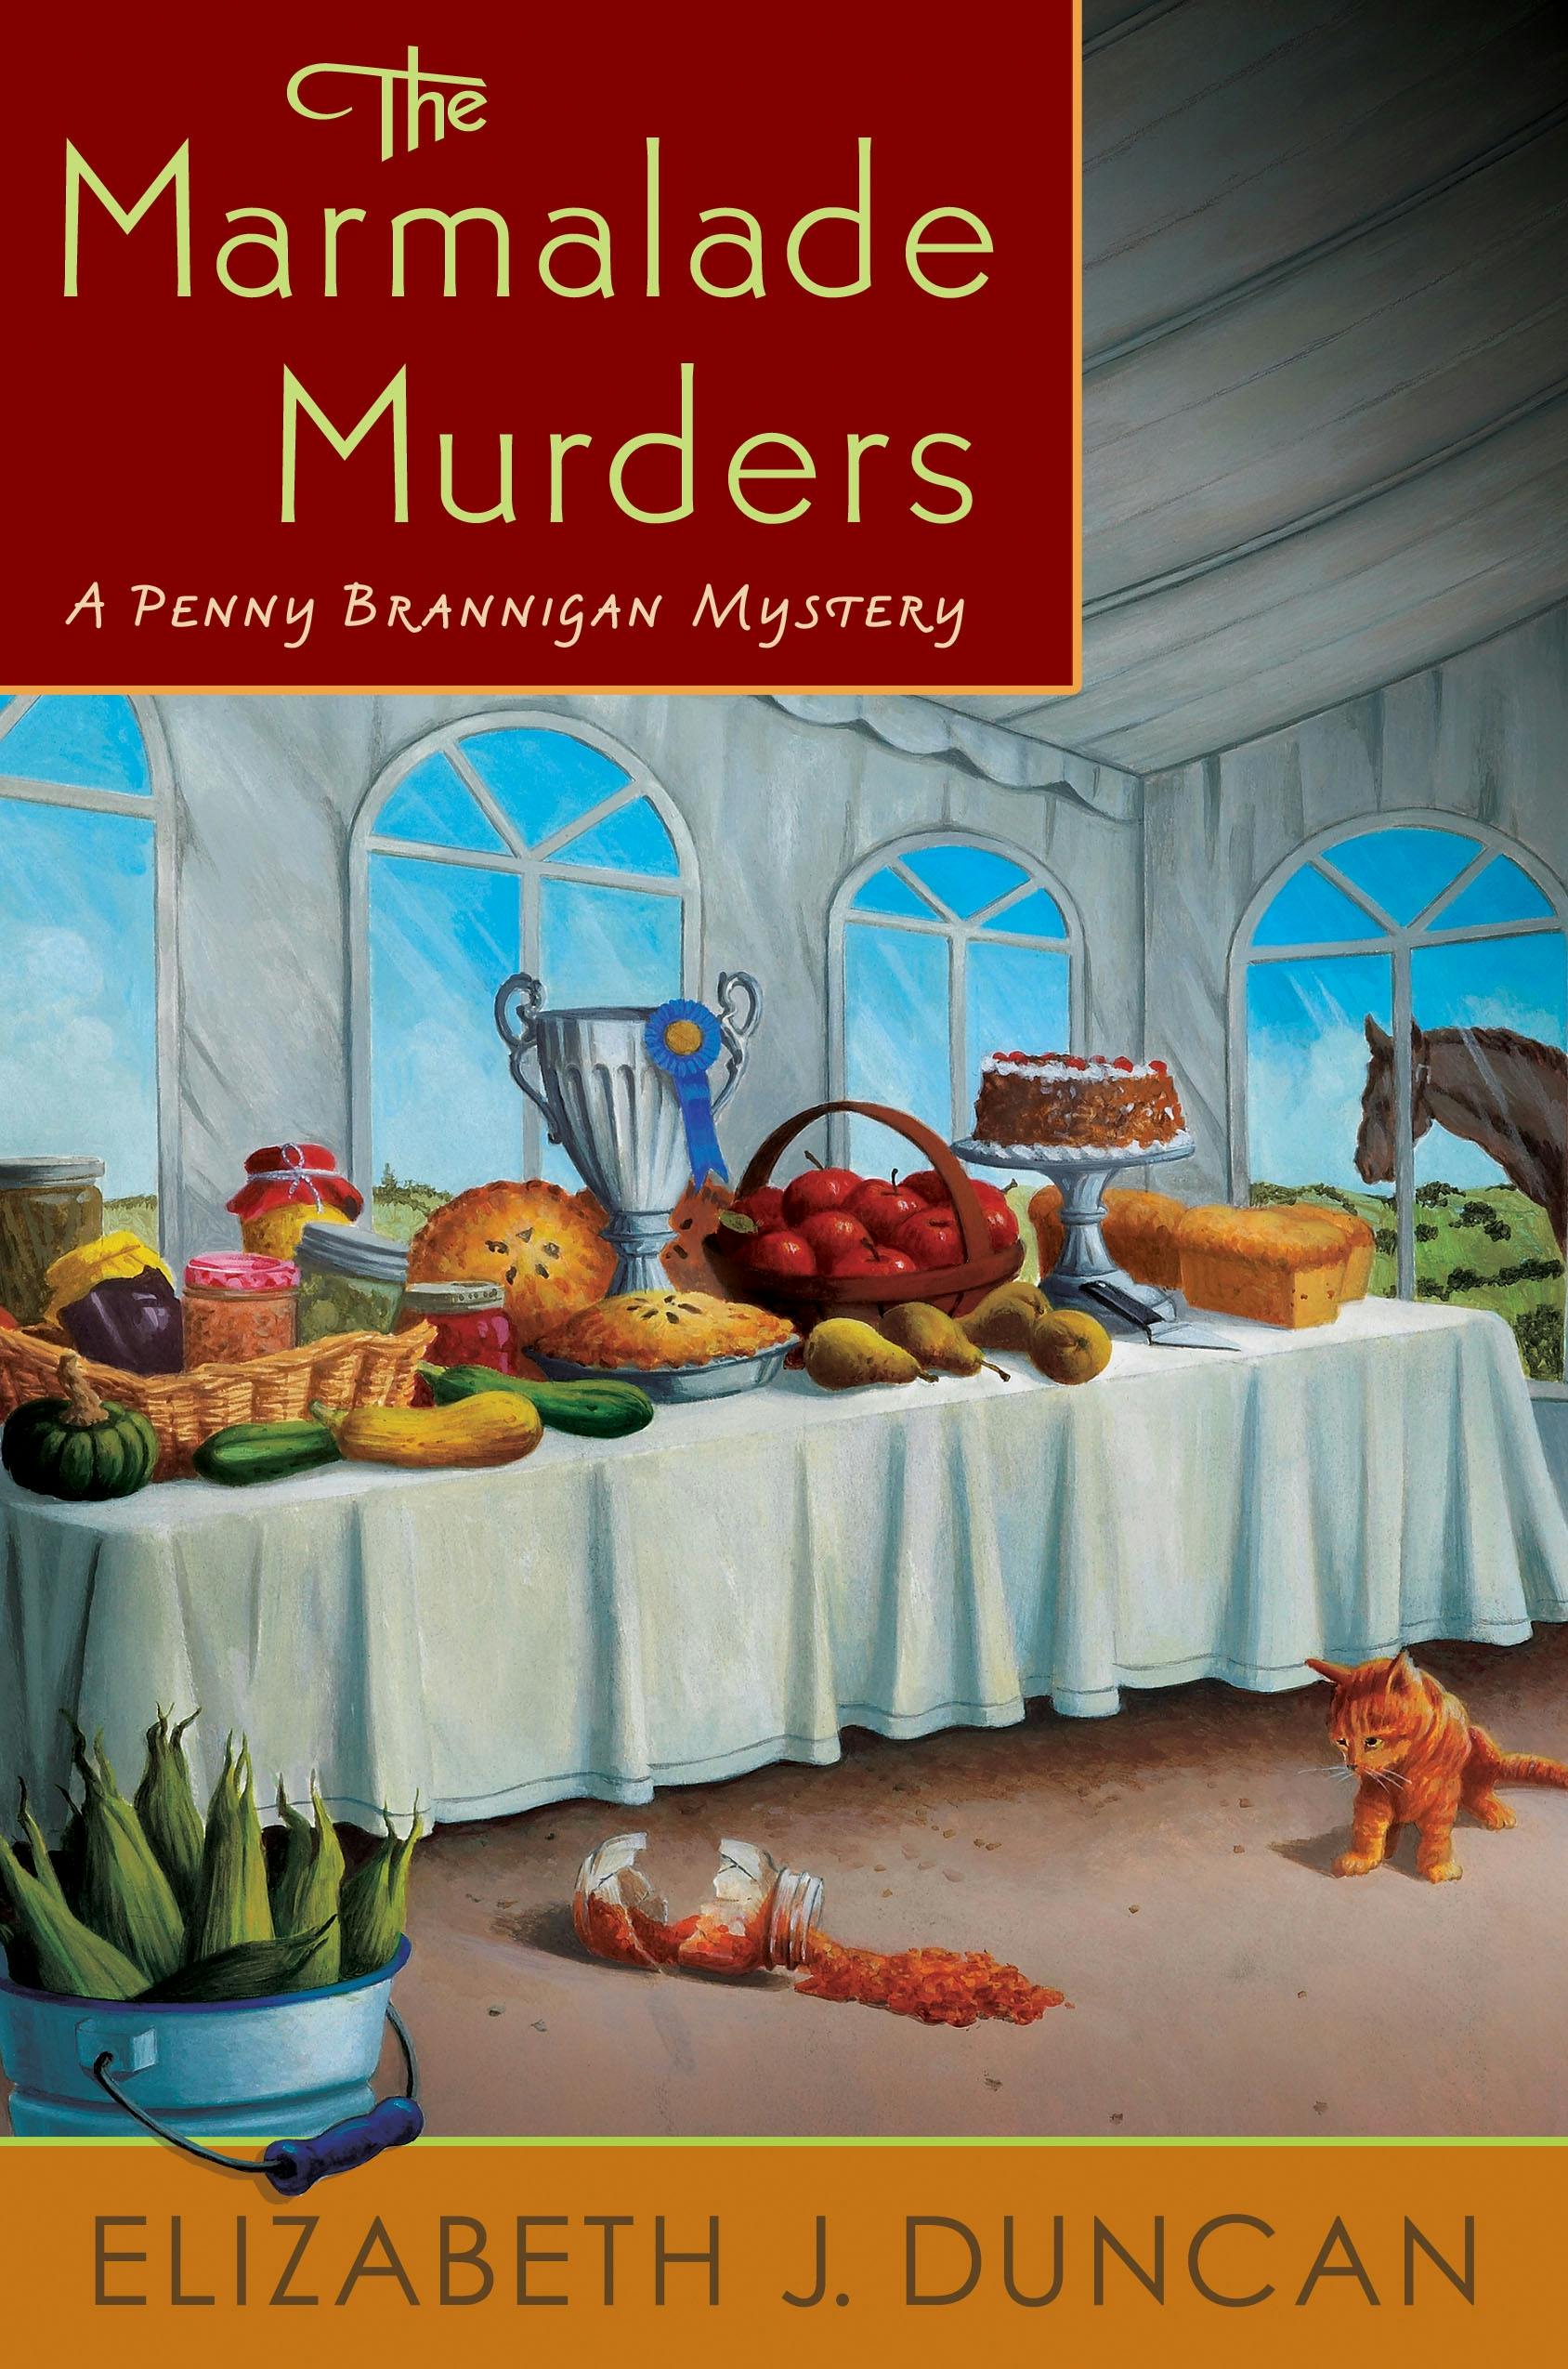 Image of The Marmalade Murders